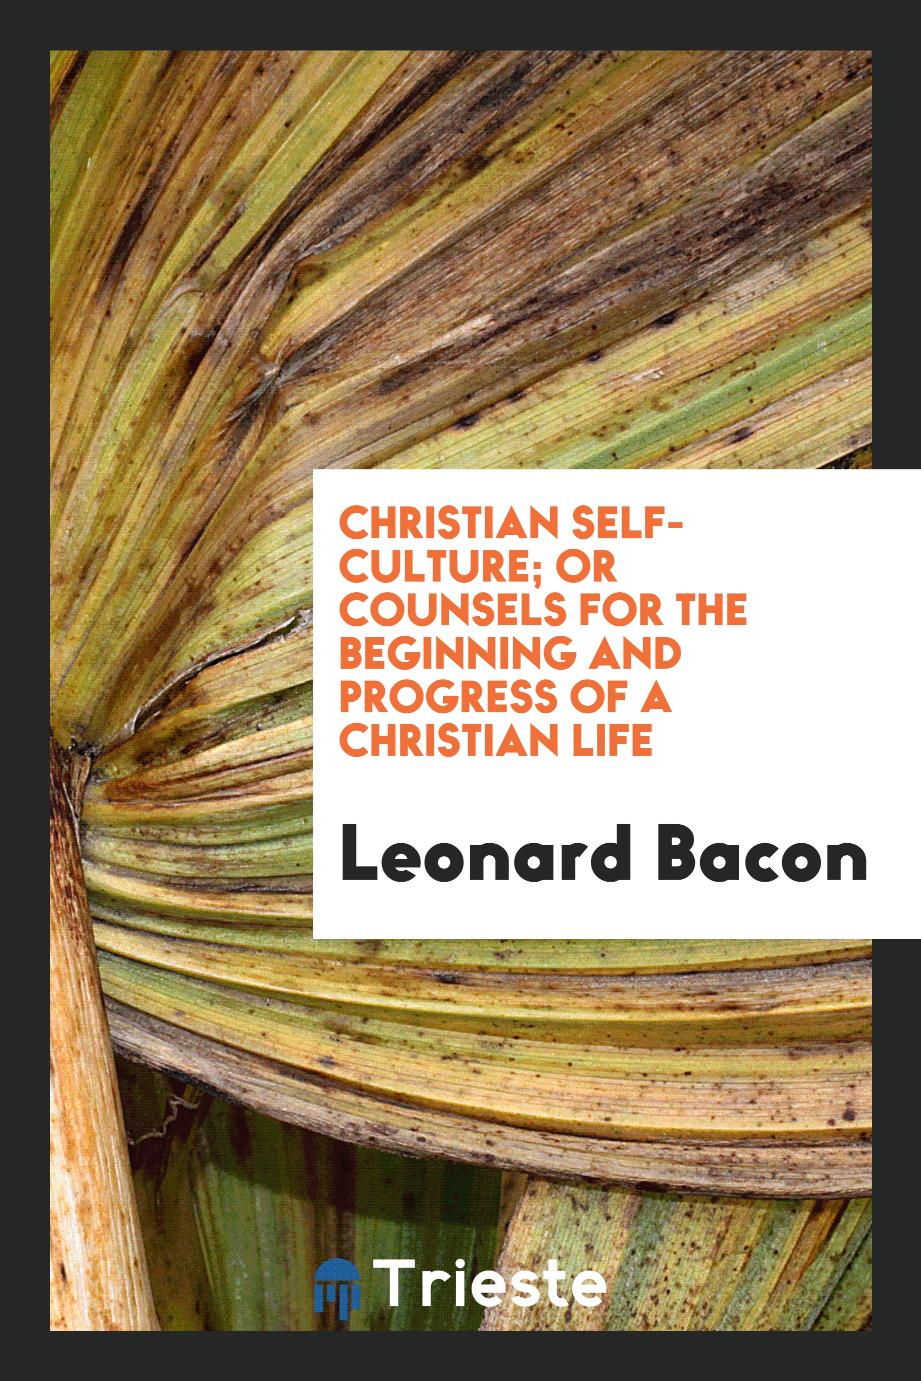 Christian self-culture; or counsels for the beginning and progress of a Christian life